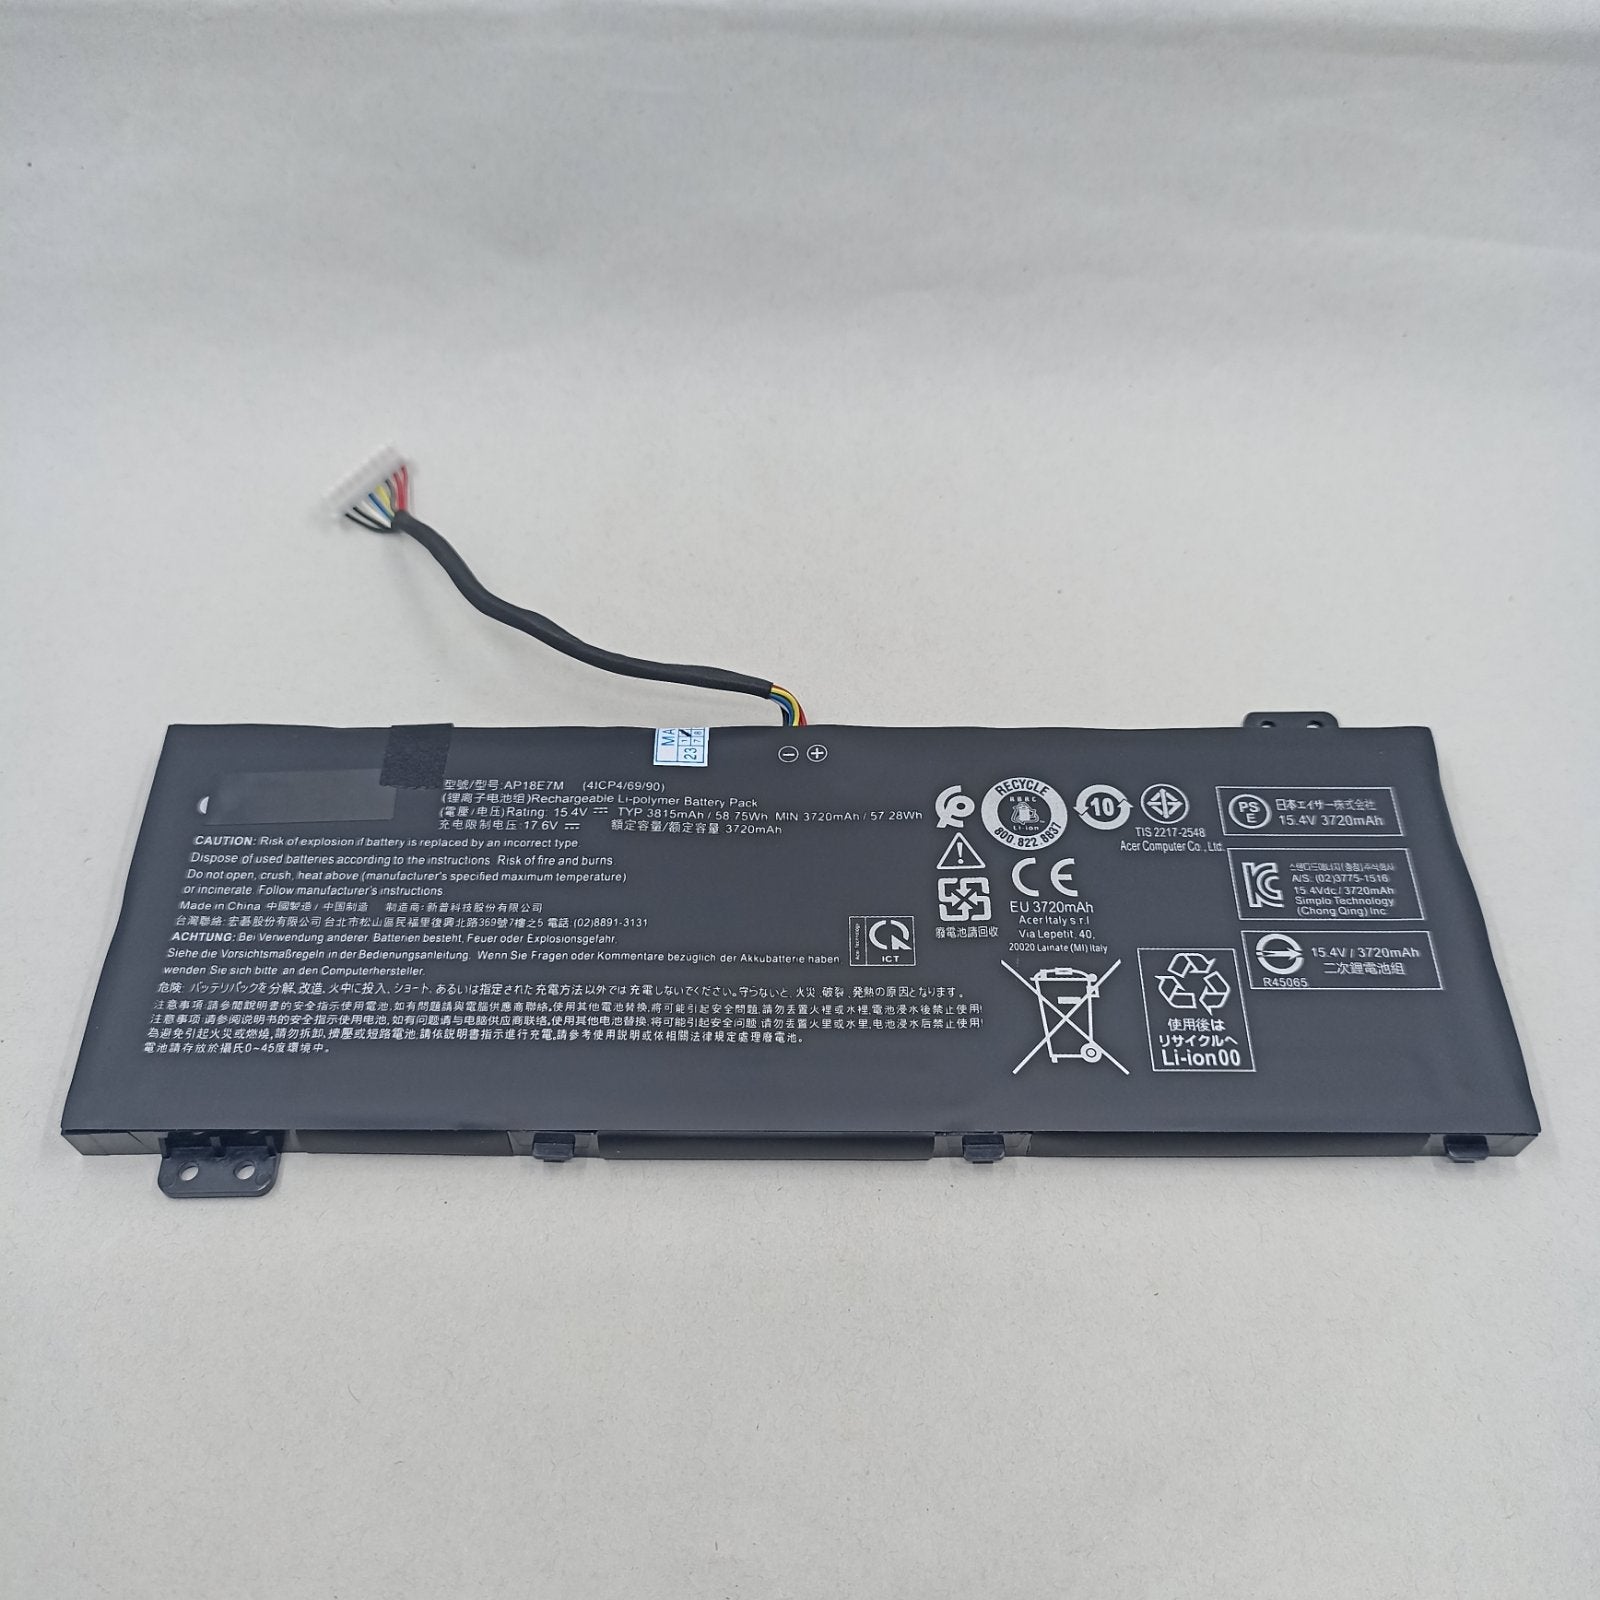 Replacement Battery for Acer AN515-43 A1